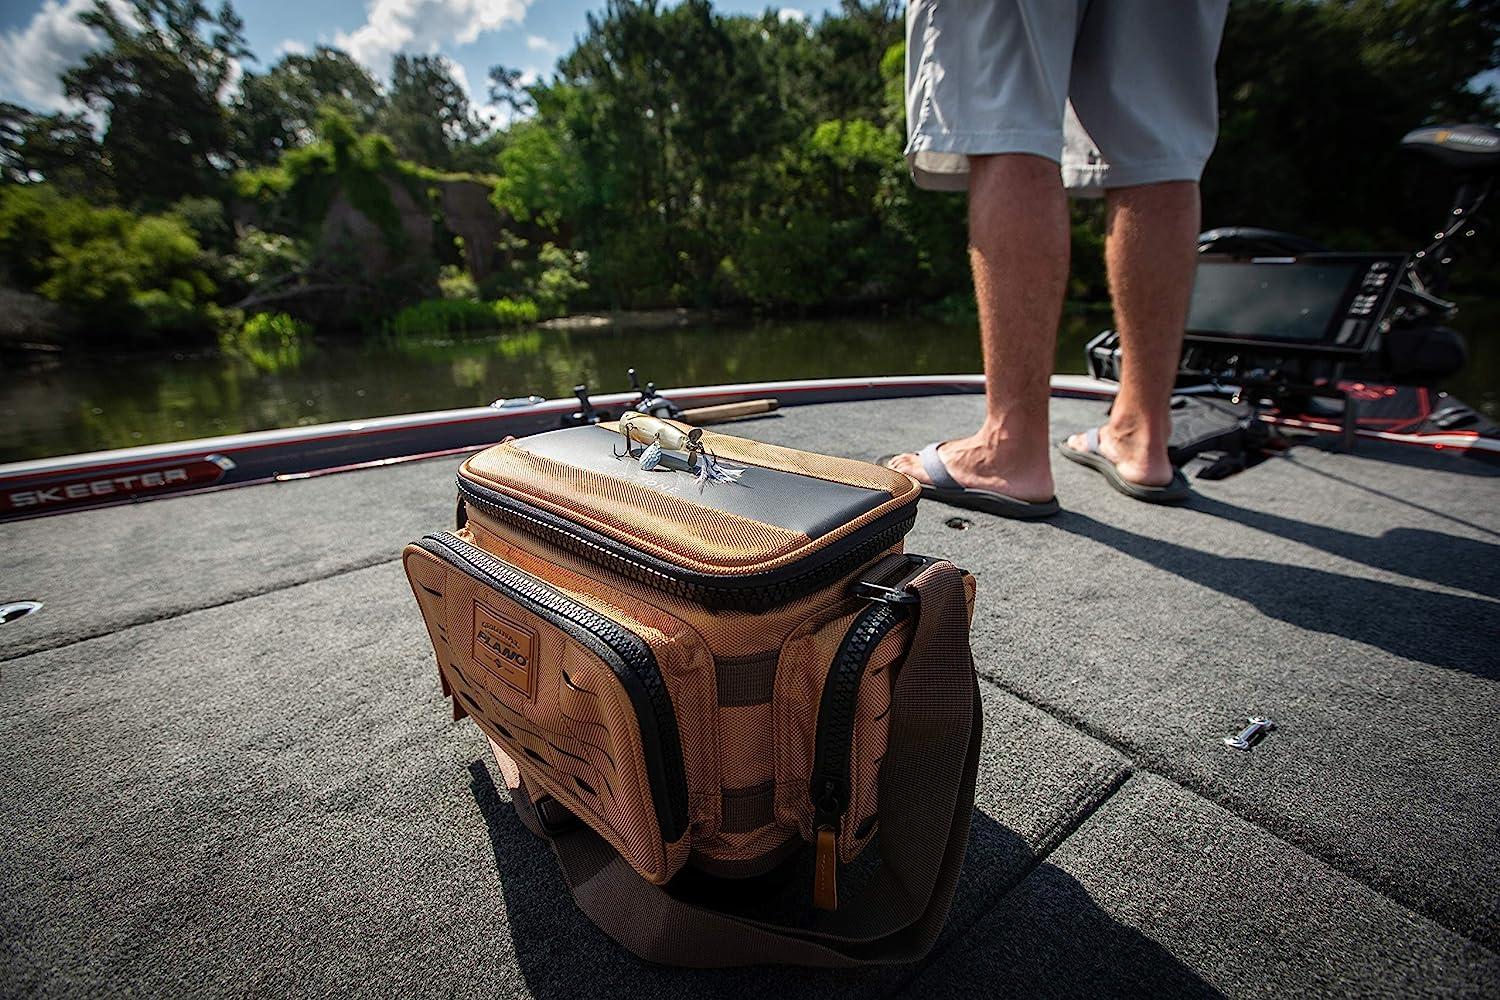 Plano Guide Series Tackle Bag 3700 XL 1 Year Review! 